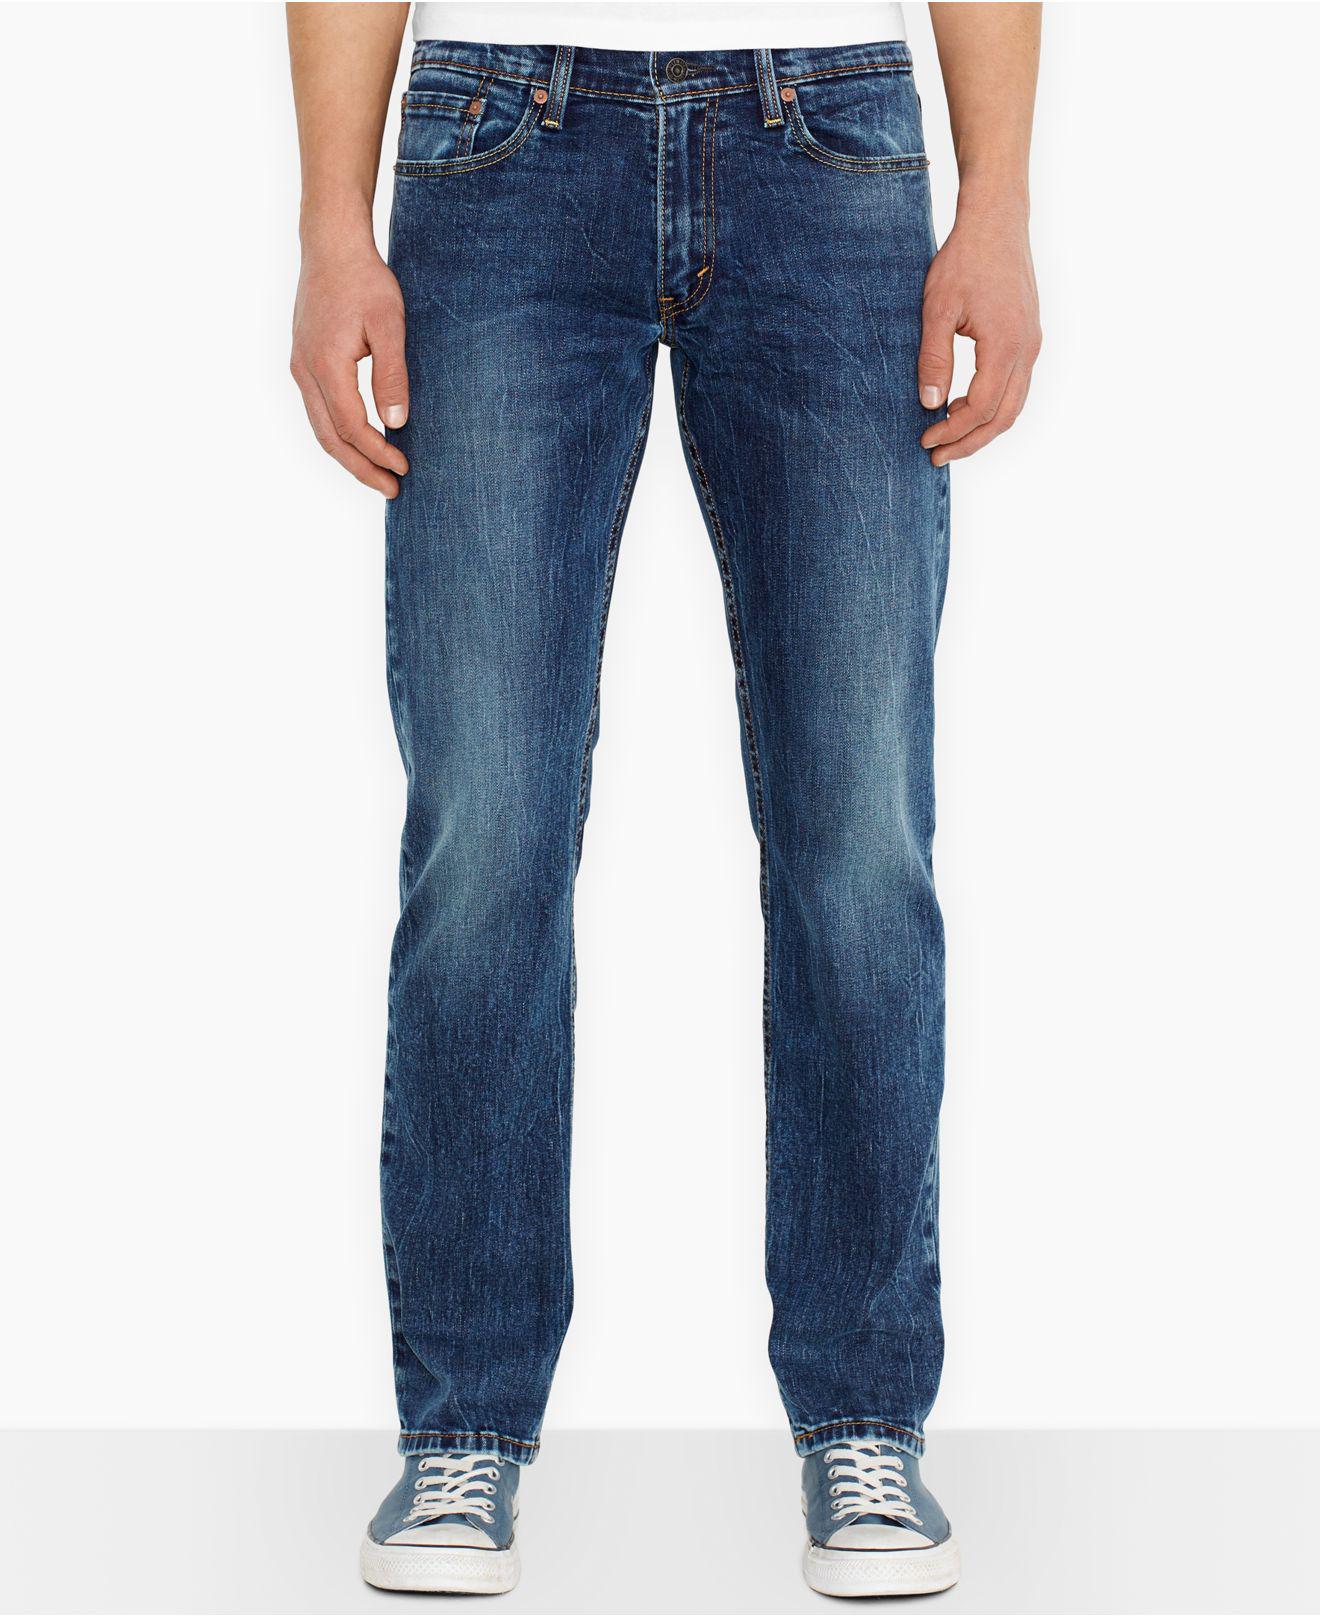 Levi's Denim 514 Straight Fit Jeans in Blue for Men - Lyst